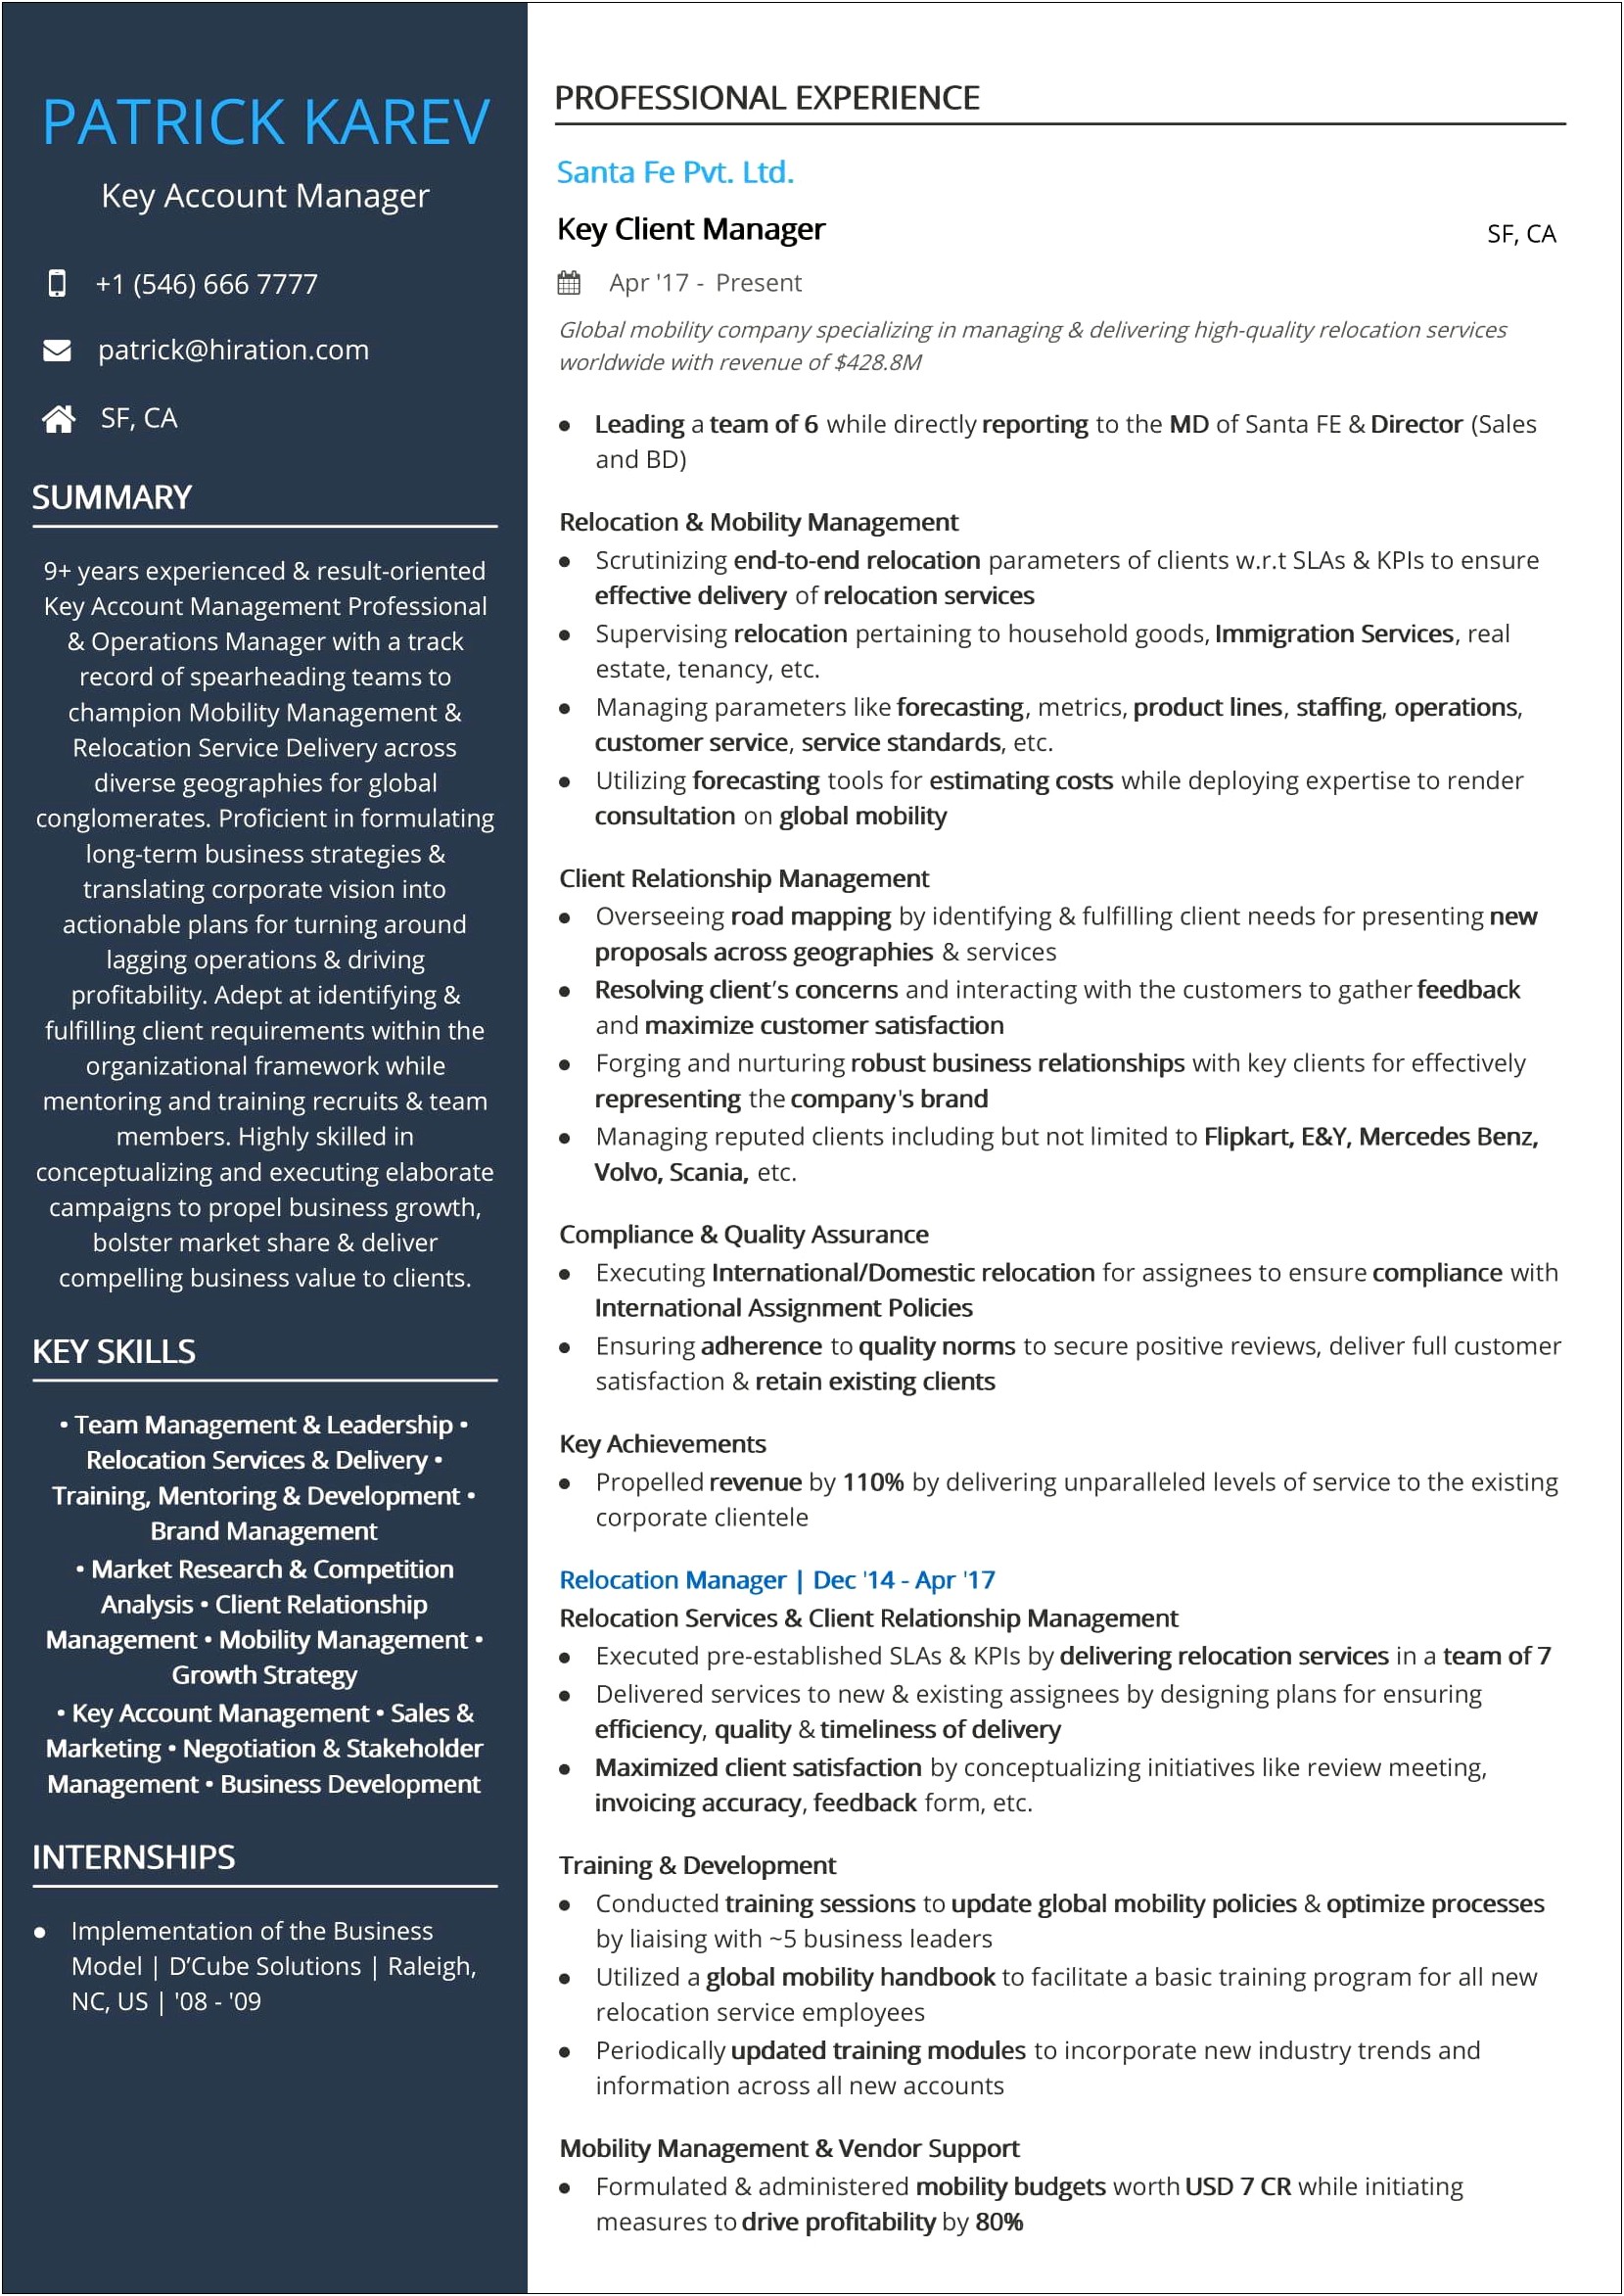 Institutional Client Relationship Manager Resumes